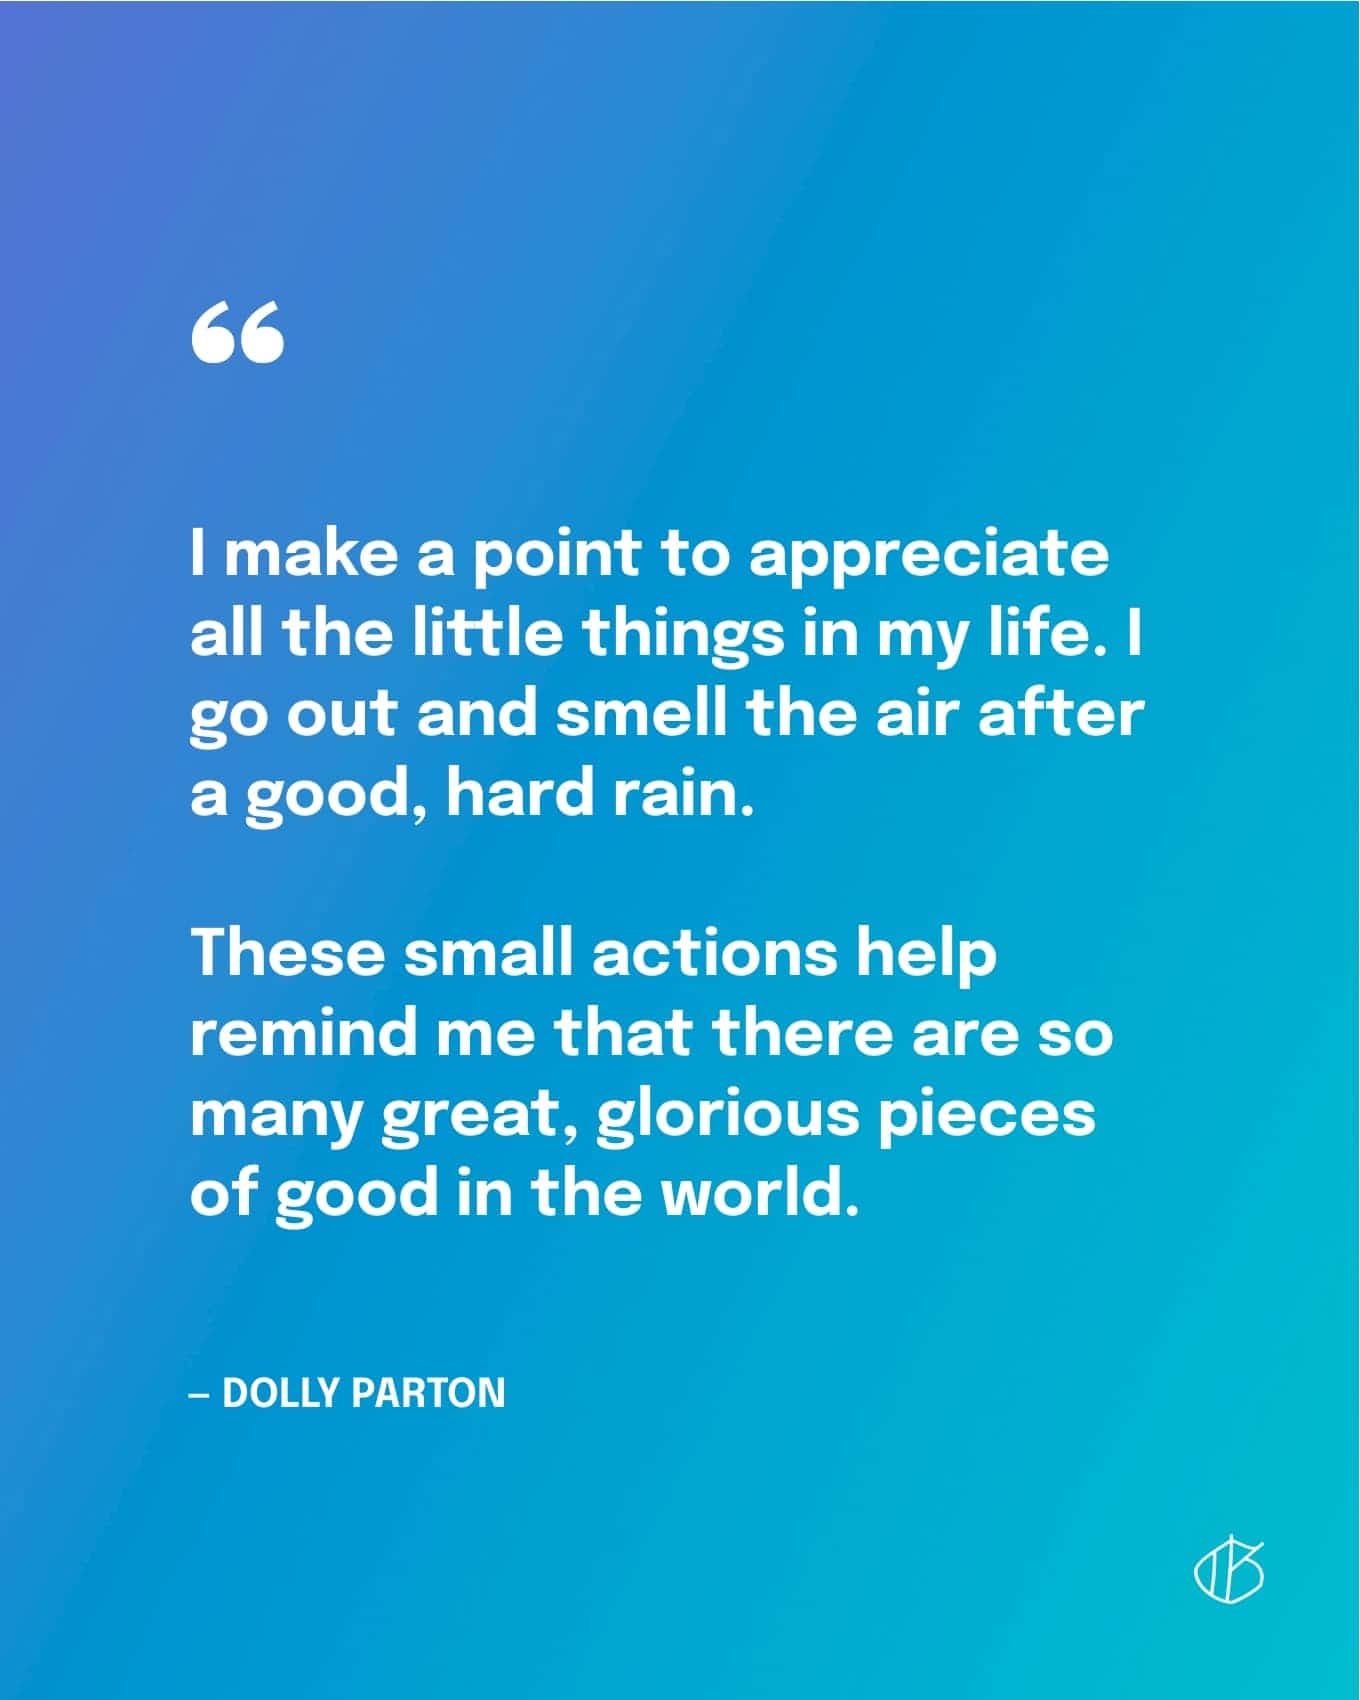 Dolly Parton Quote Wallpaper: I make a point to appreciate all the little things in my life. I go out and smell the air after a good, hard rain. These small actions help remind me that there are so many great, glorious pieces of good in the world.